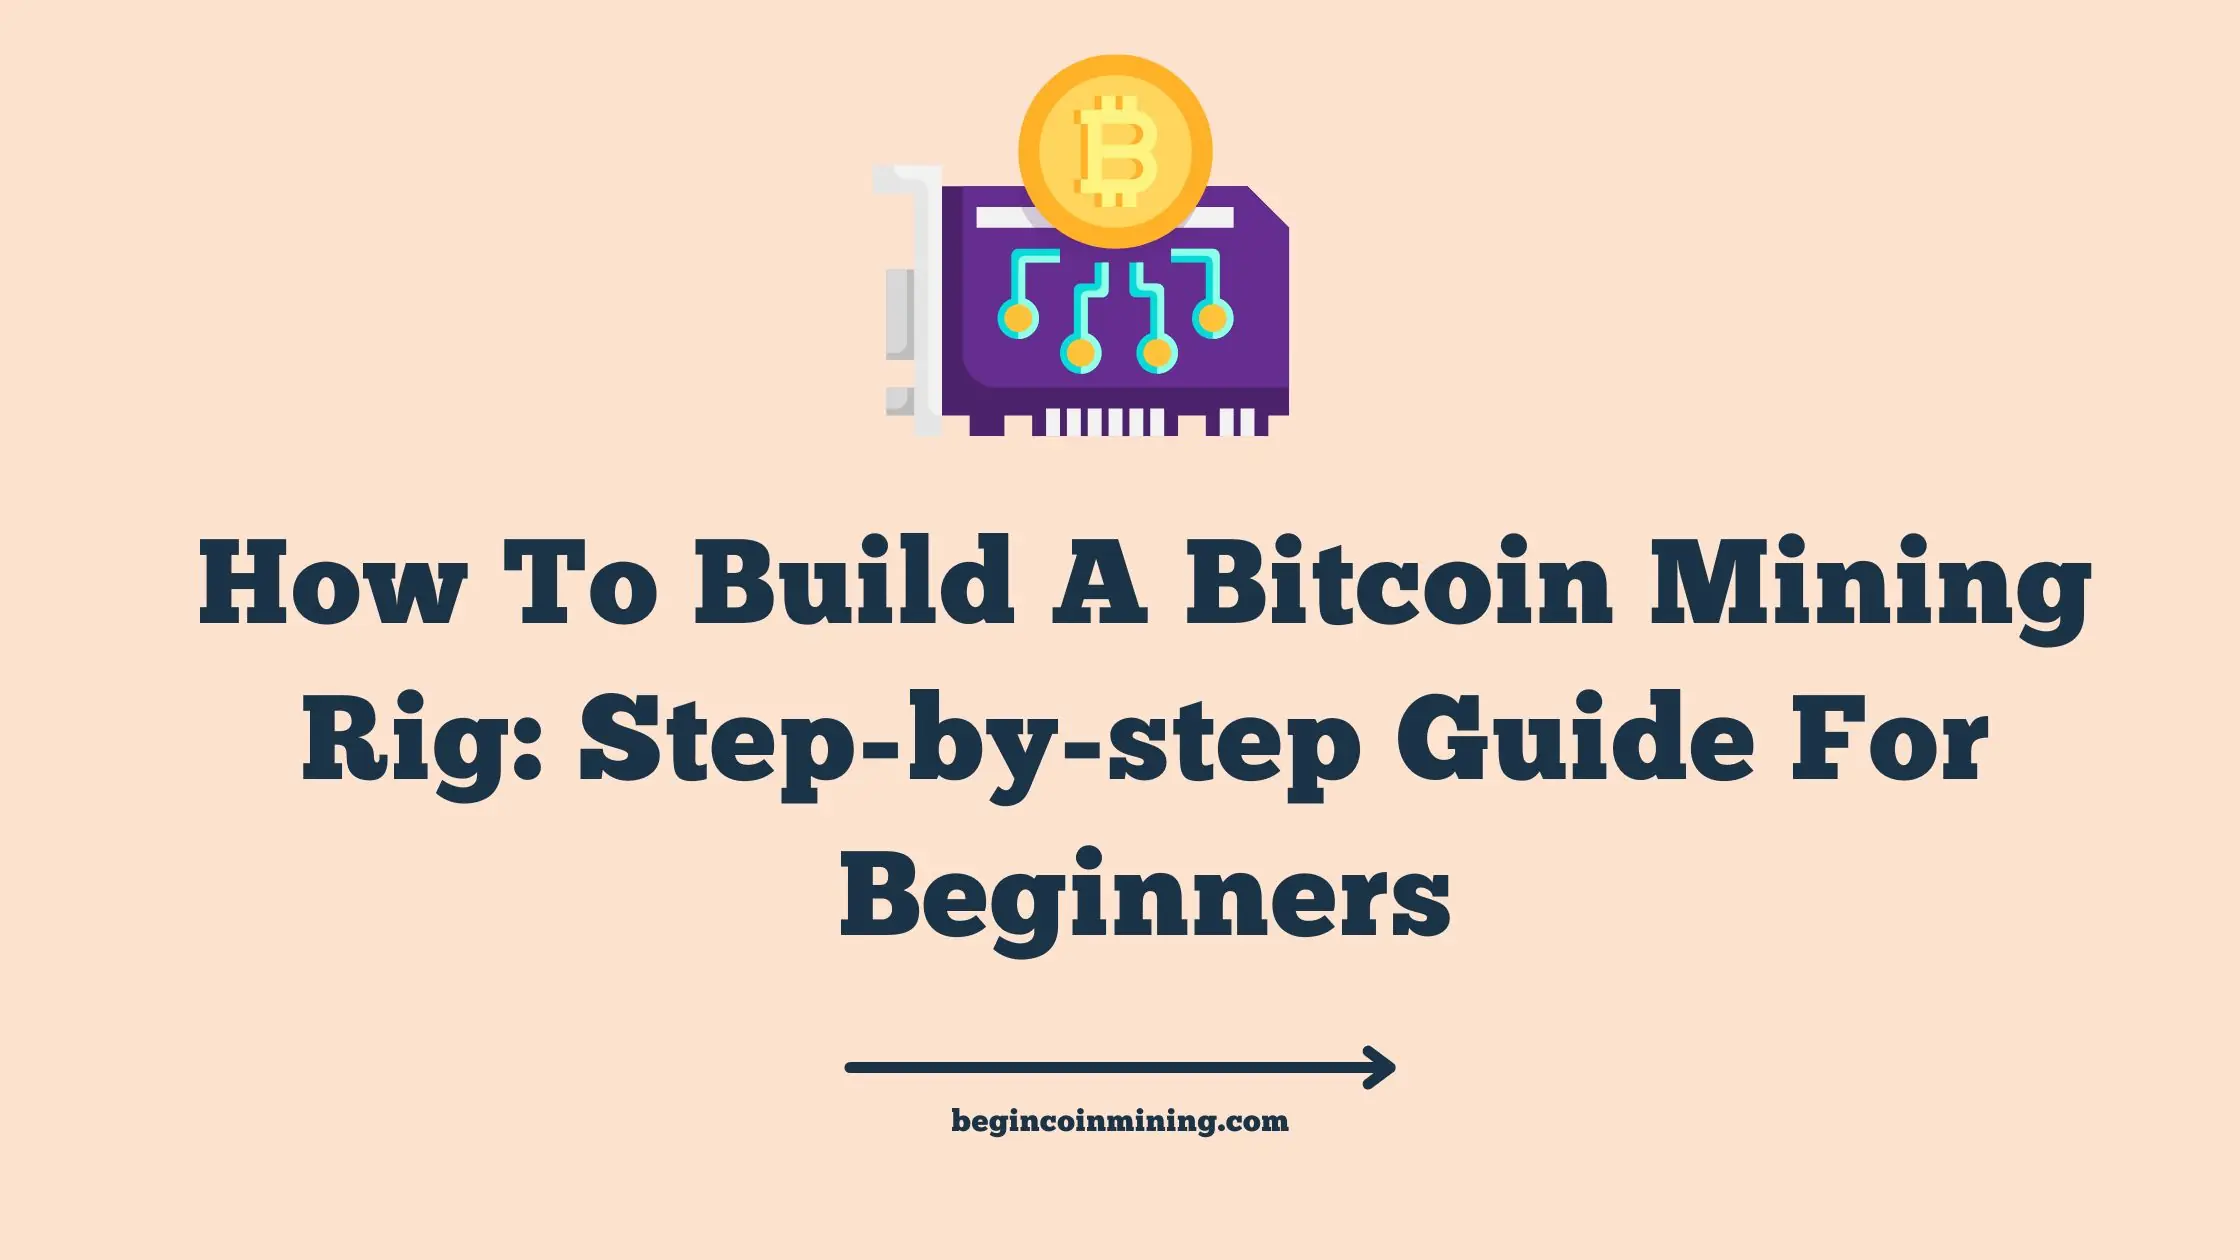 How To Build A Bitcoin Mining Rig: Step-by-step Guide For Beginners